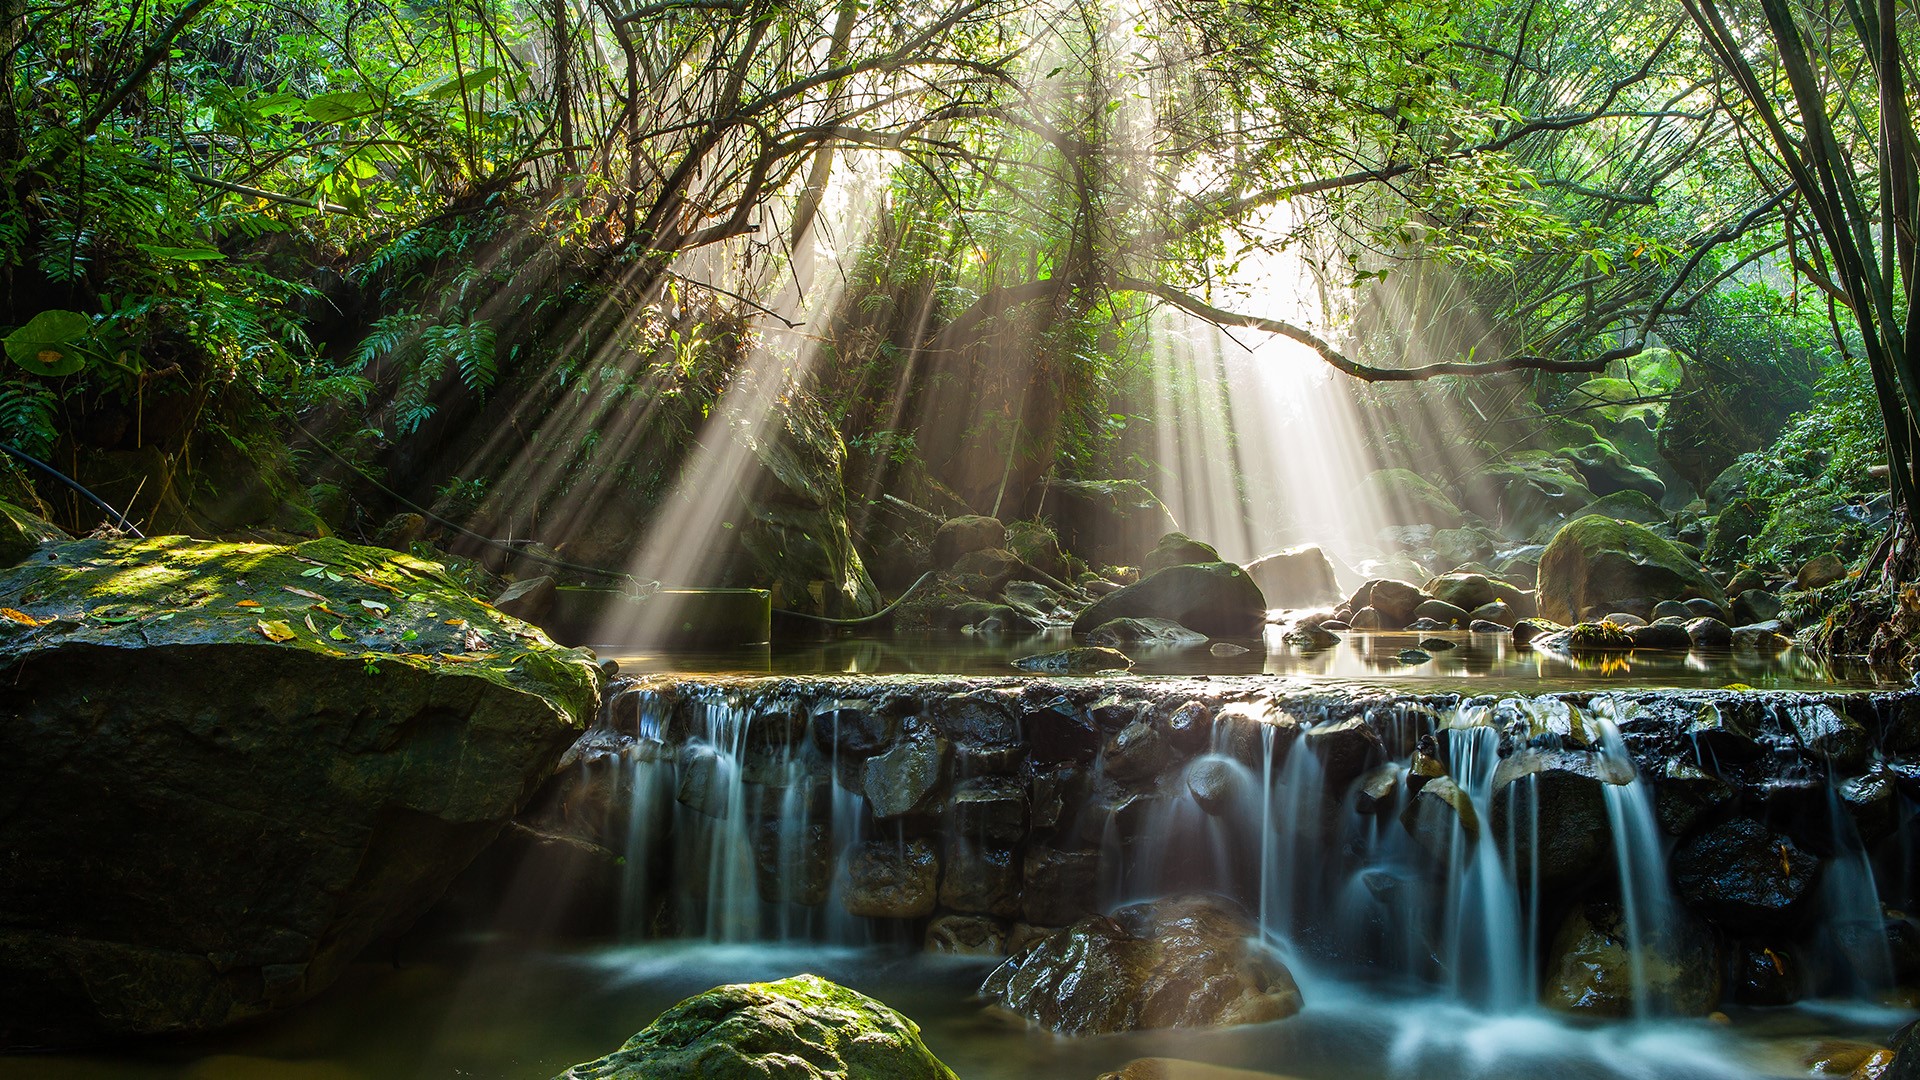 General 1920x1080 nature landscape forest bamboo rocks water long exposure leaves sun rays Taipei Taiwan